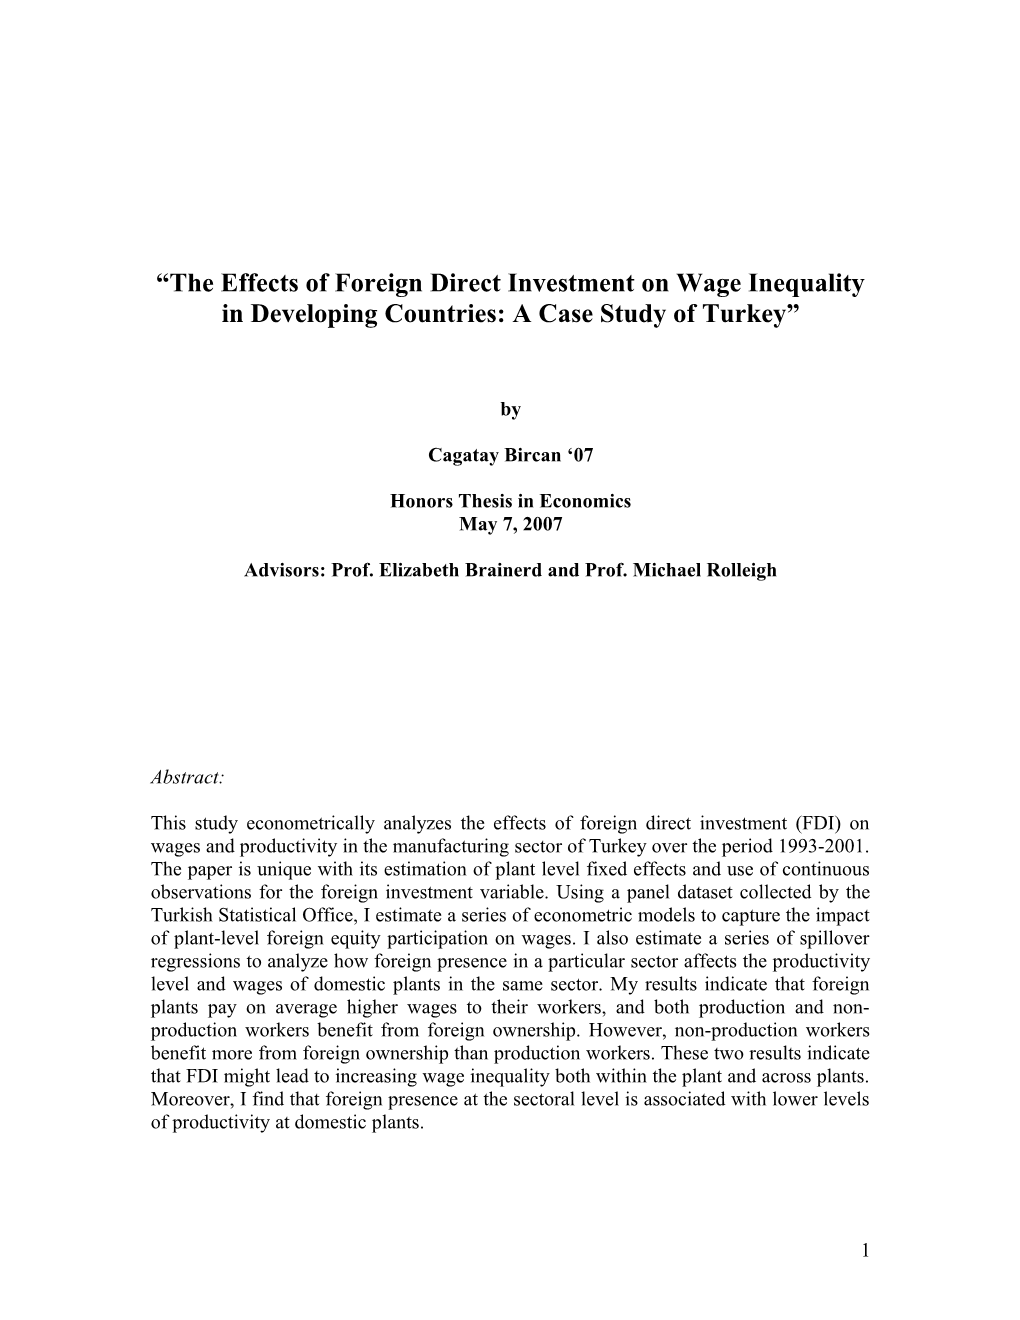 The Effects of Foreign Direct Investment on Wage Inequality in Developing Countries: A